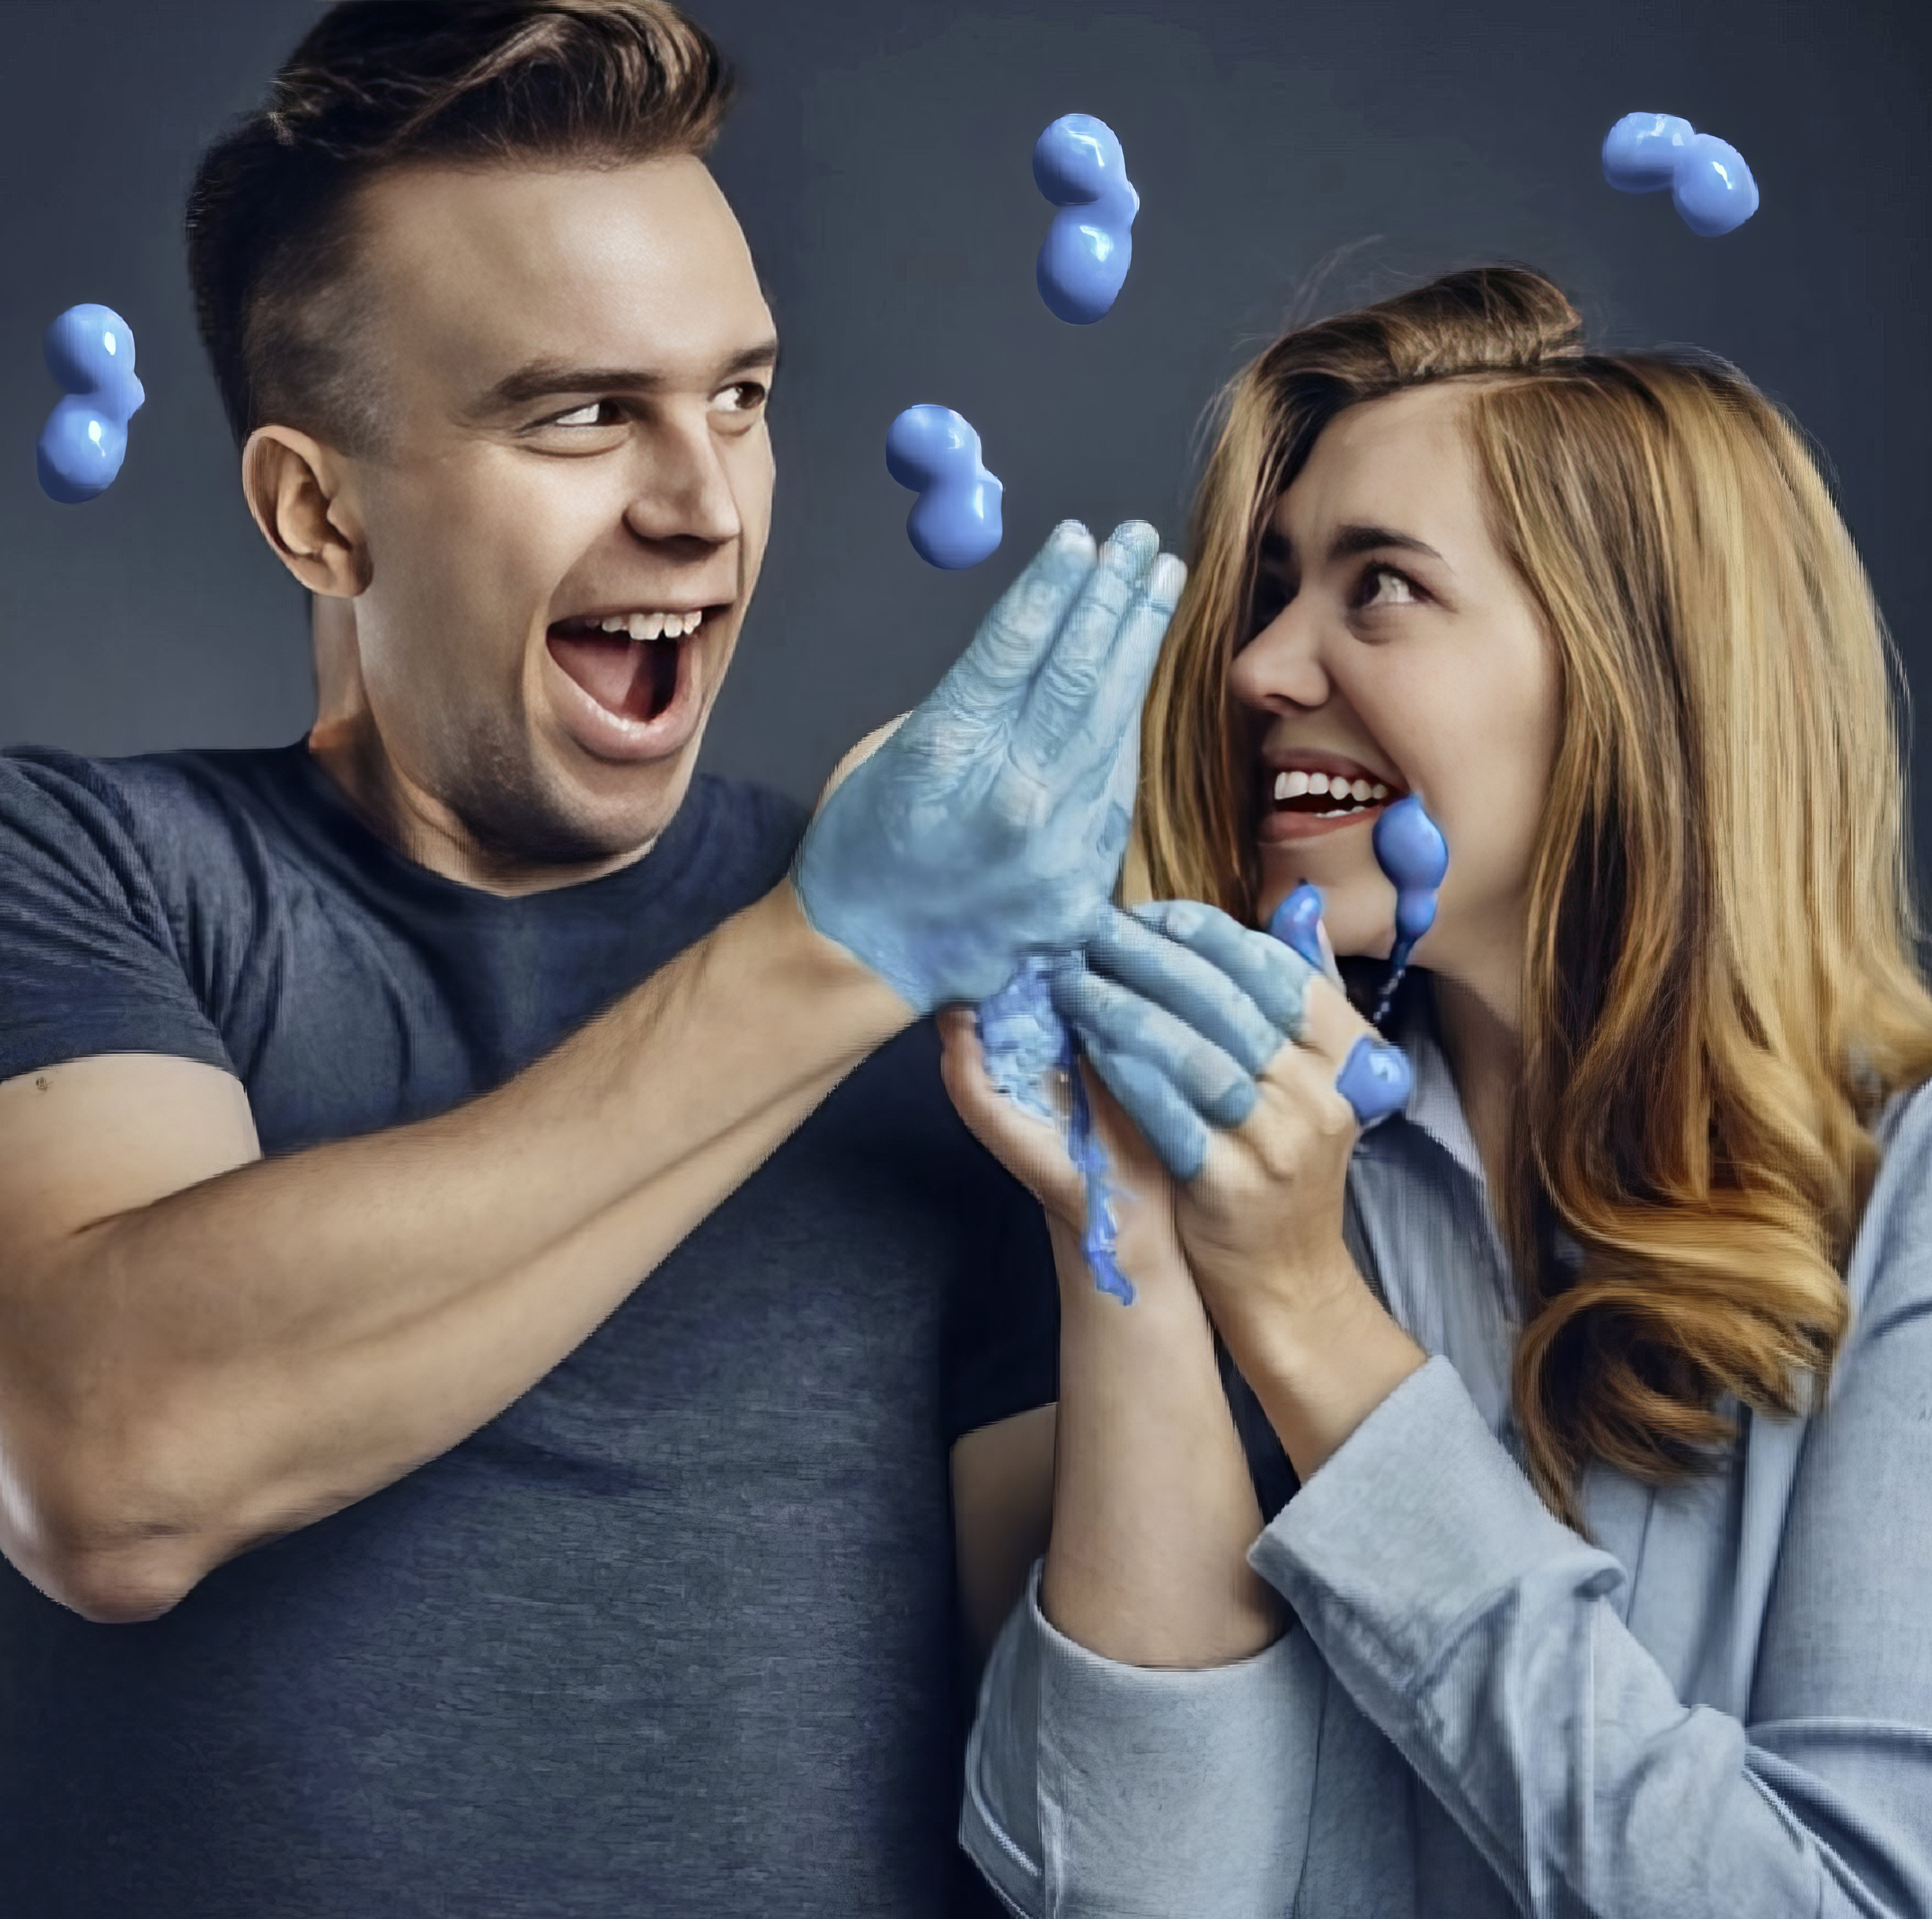 Man and woman with hands covered in blue substance.